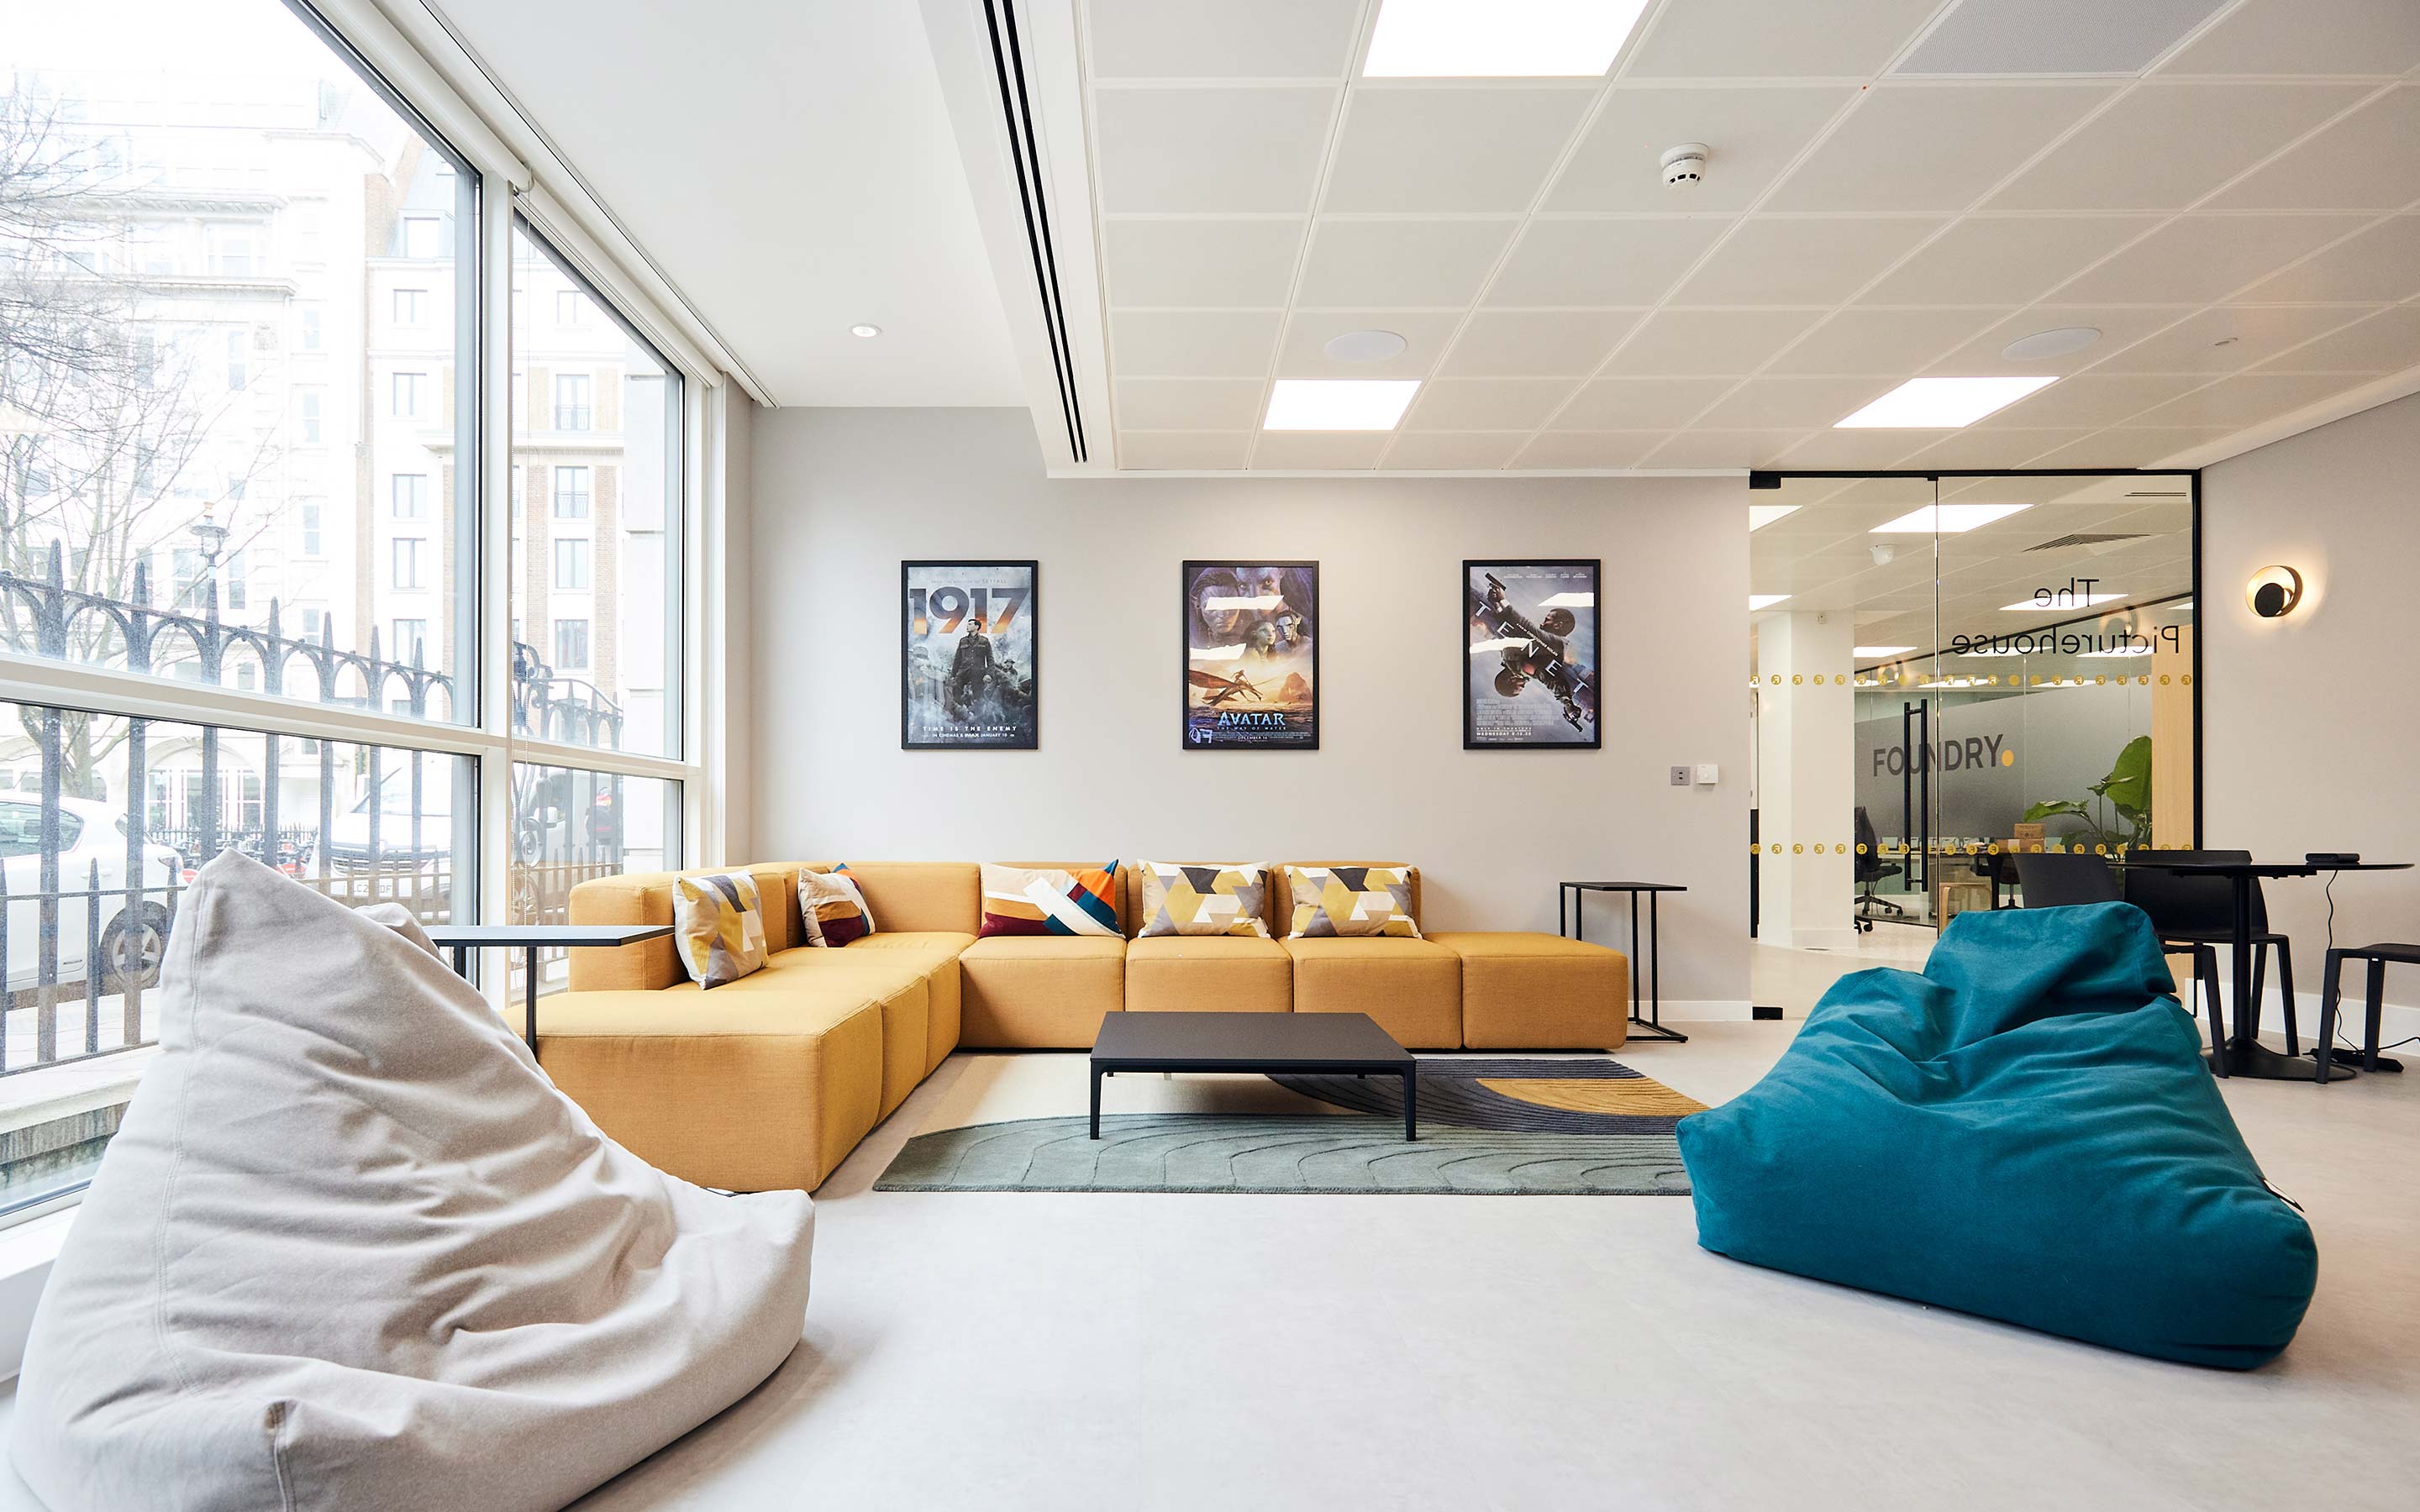 Office interior featuring bean bags and couches, creating a cosy and versatile breakout area for employees